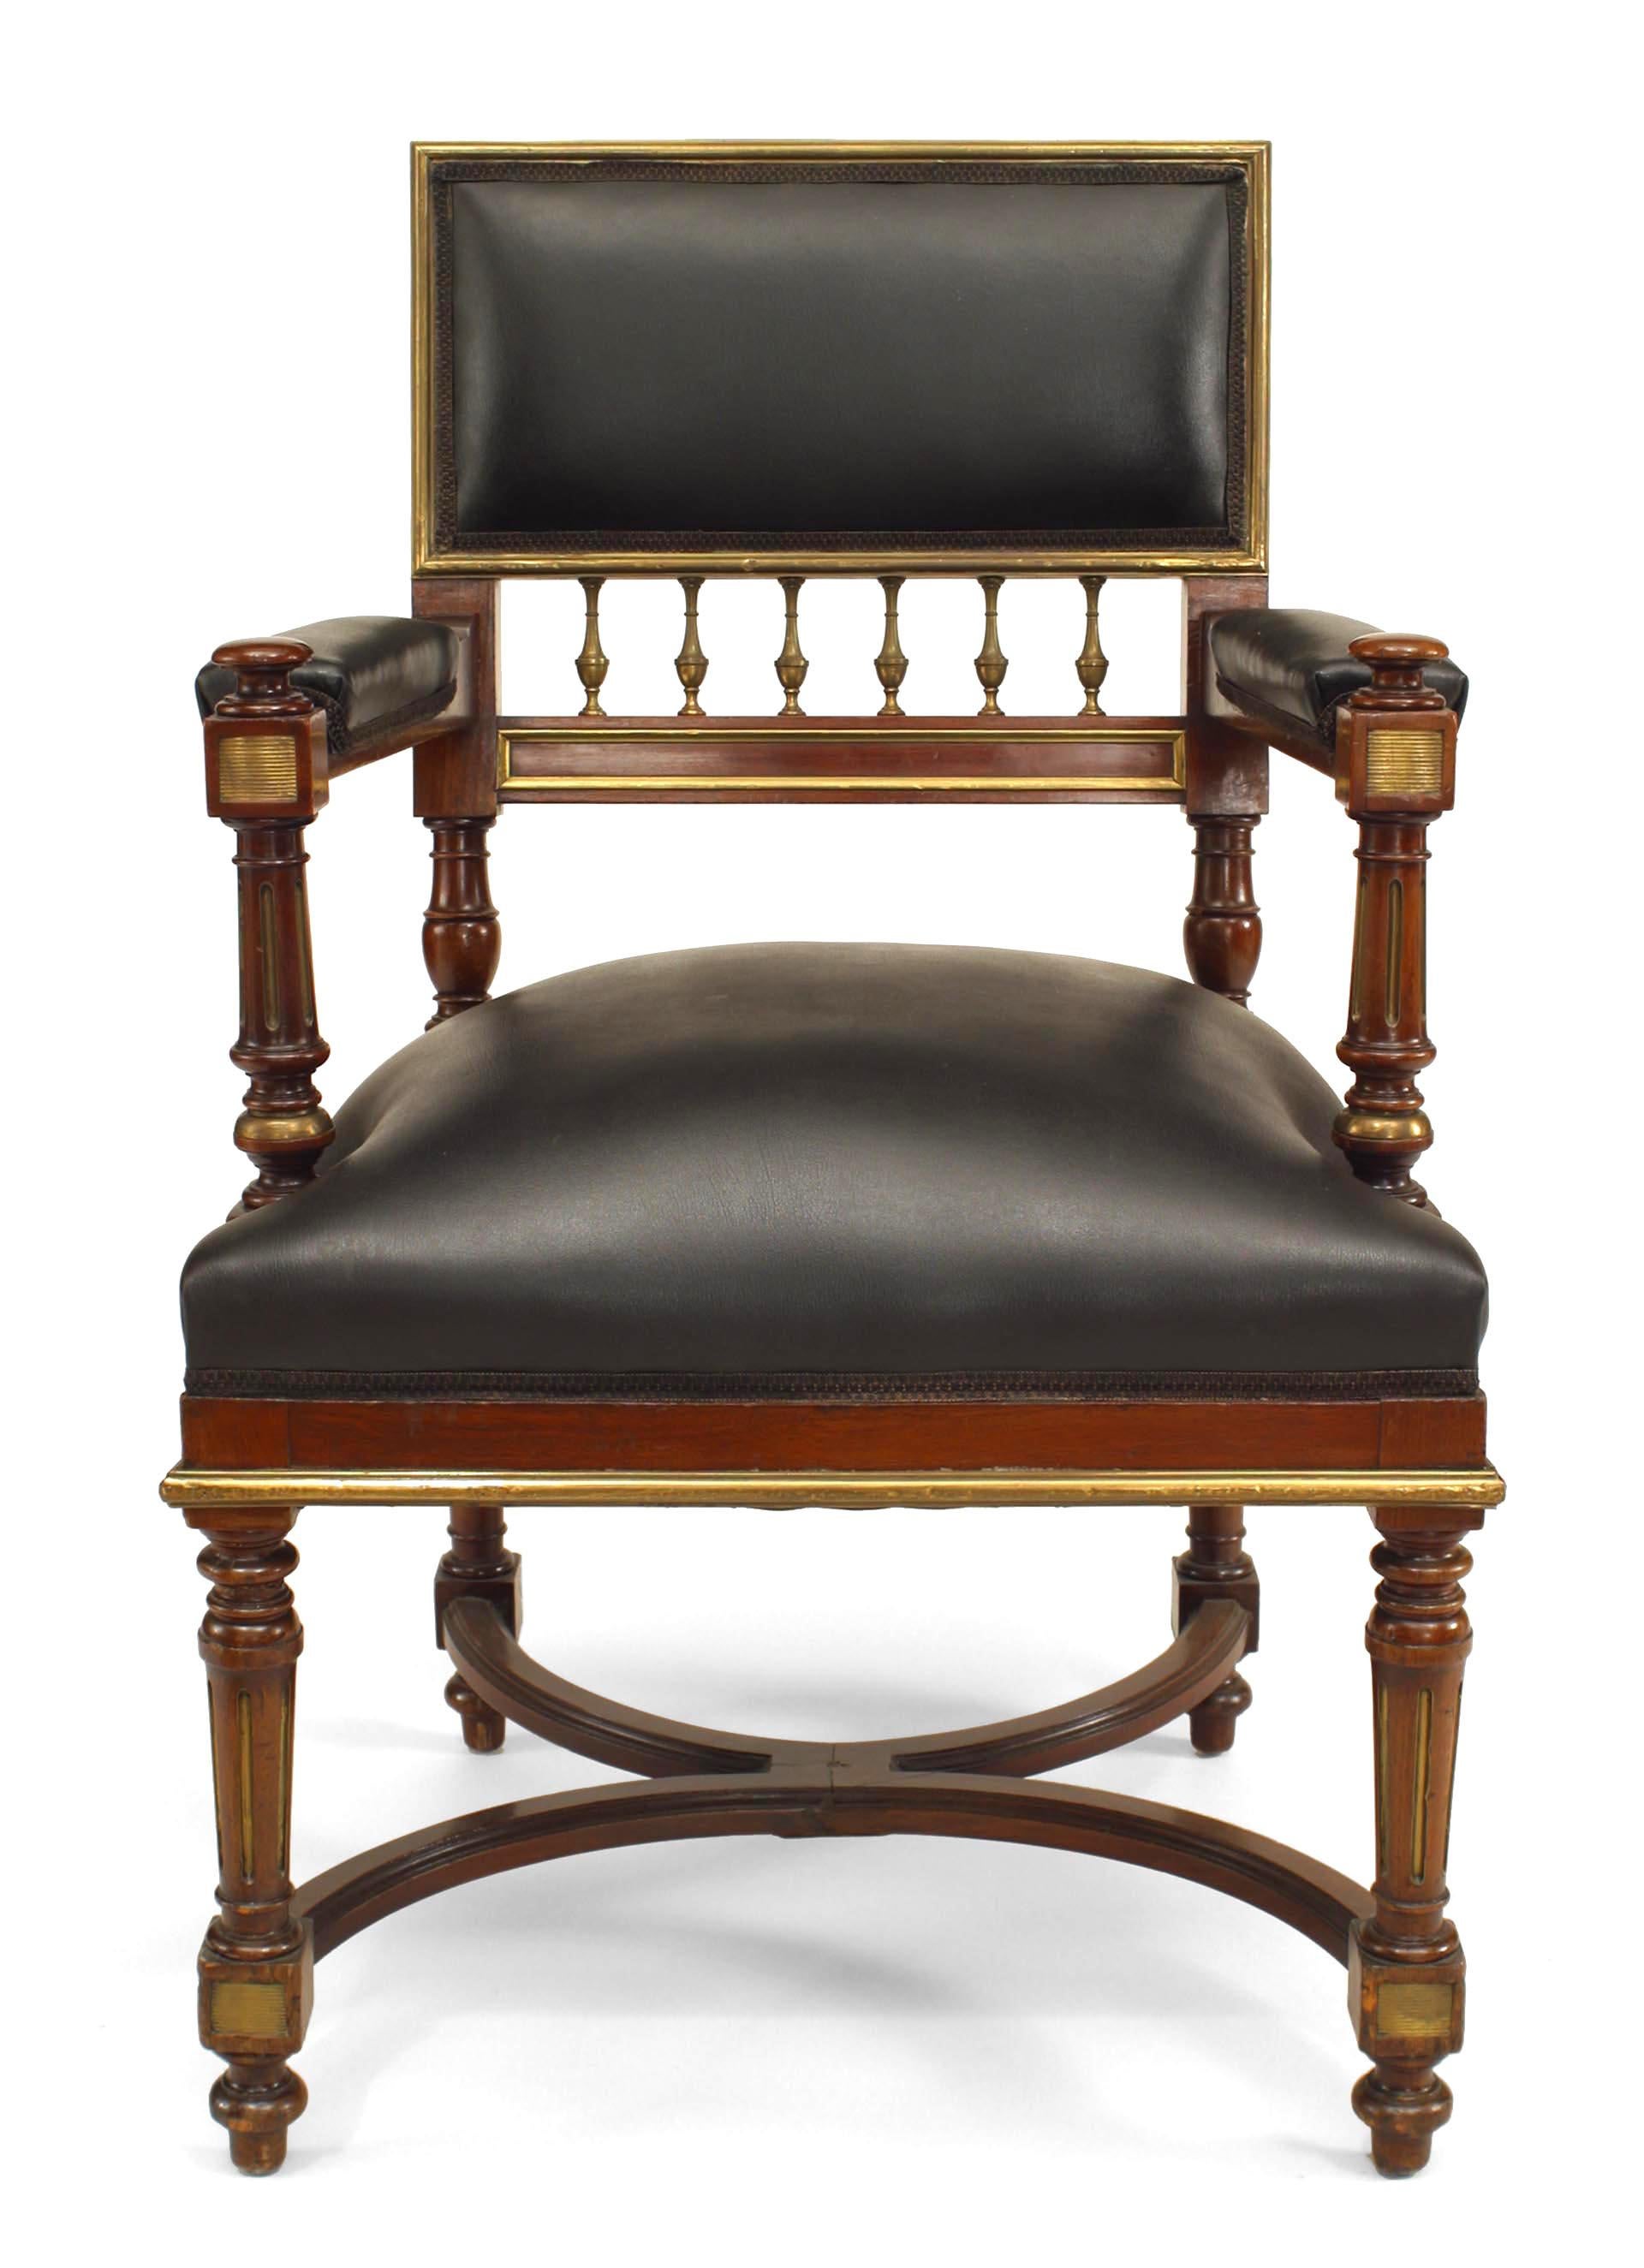 Pair of French Louis XVI-style (19th Century) mahogany arm chairs with brass trim, spindle detail, and black leather upholstery.
